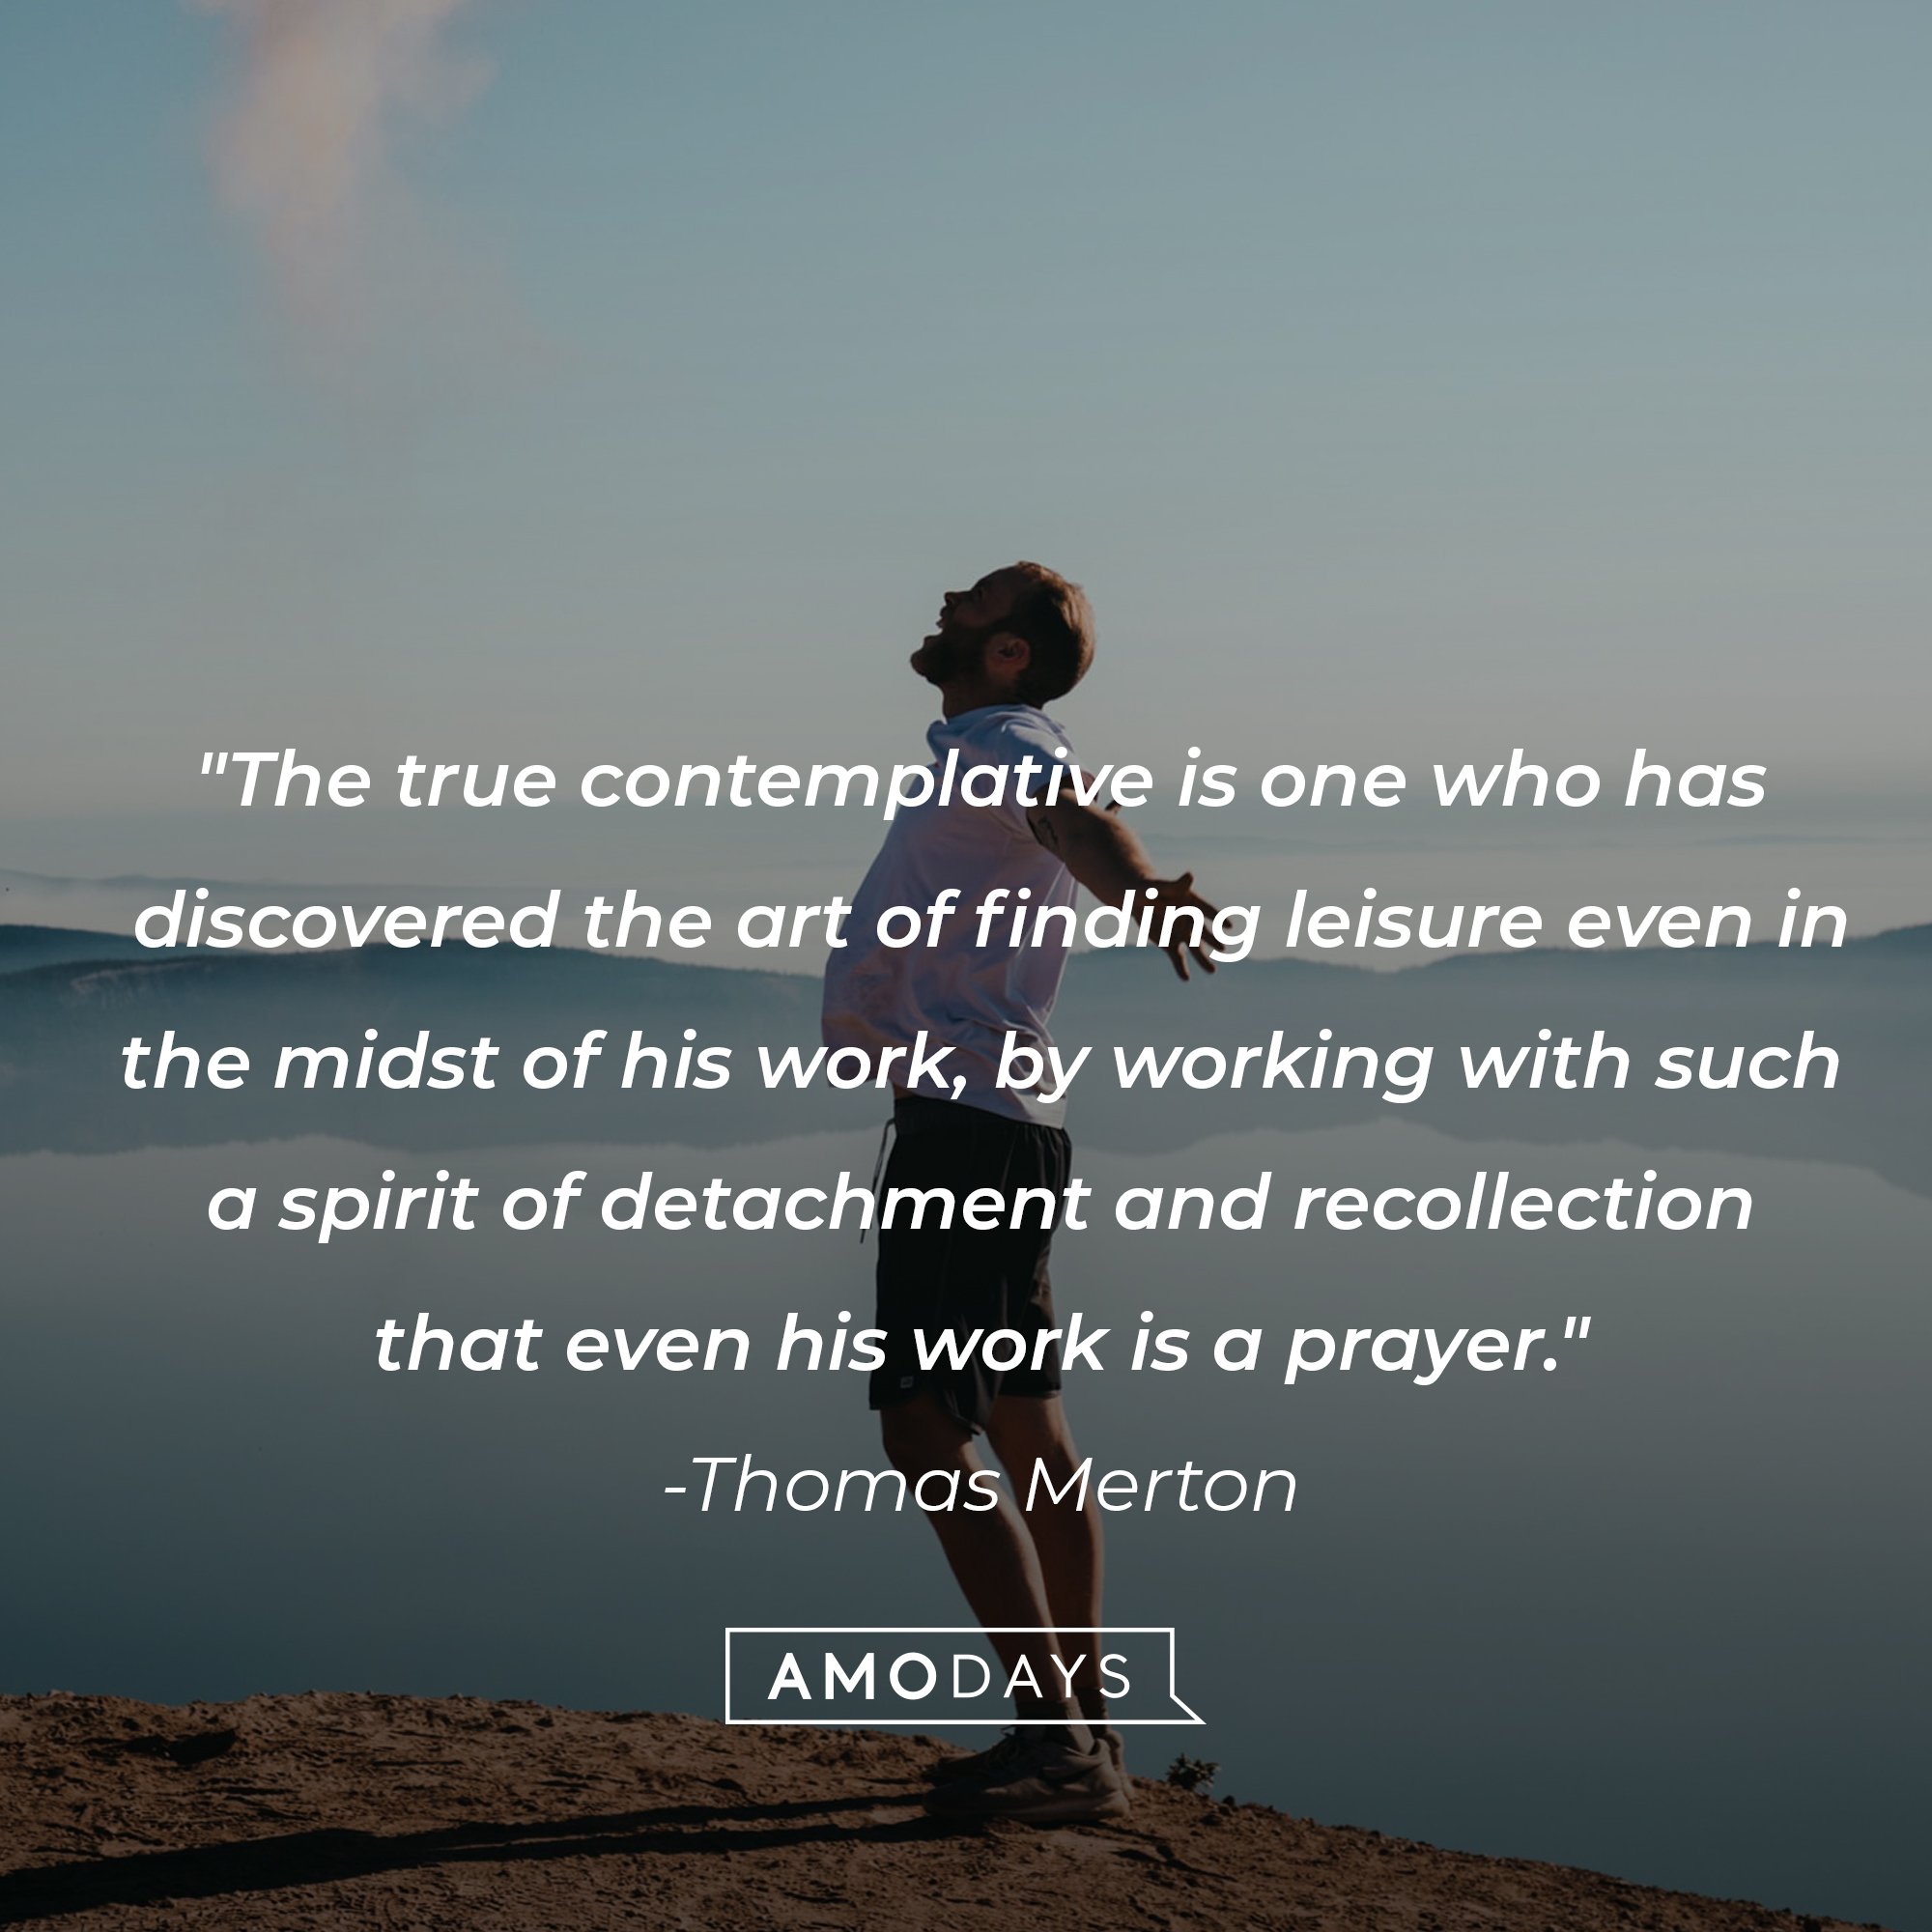 Thomas Merton's quote: "The true contemplative is one who has discovered the art of finding leisure even in the midst of his work, by working with such a spirit of detachment and recollection that even his work is a prayer." | Image: AmoDays